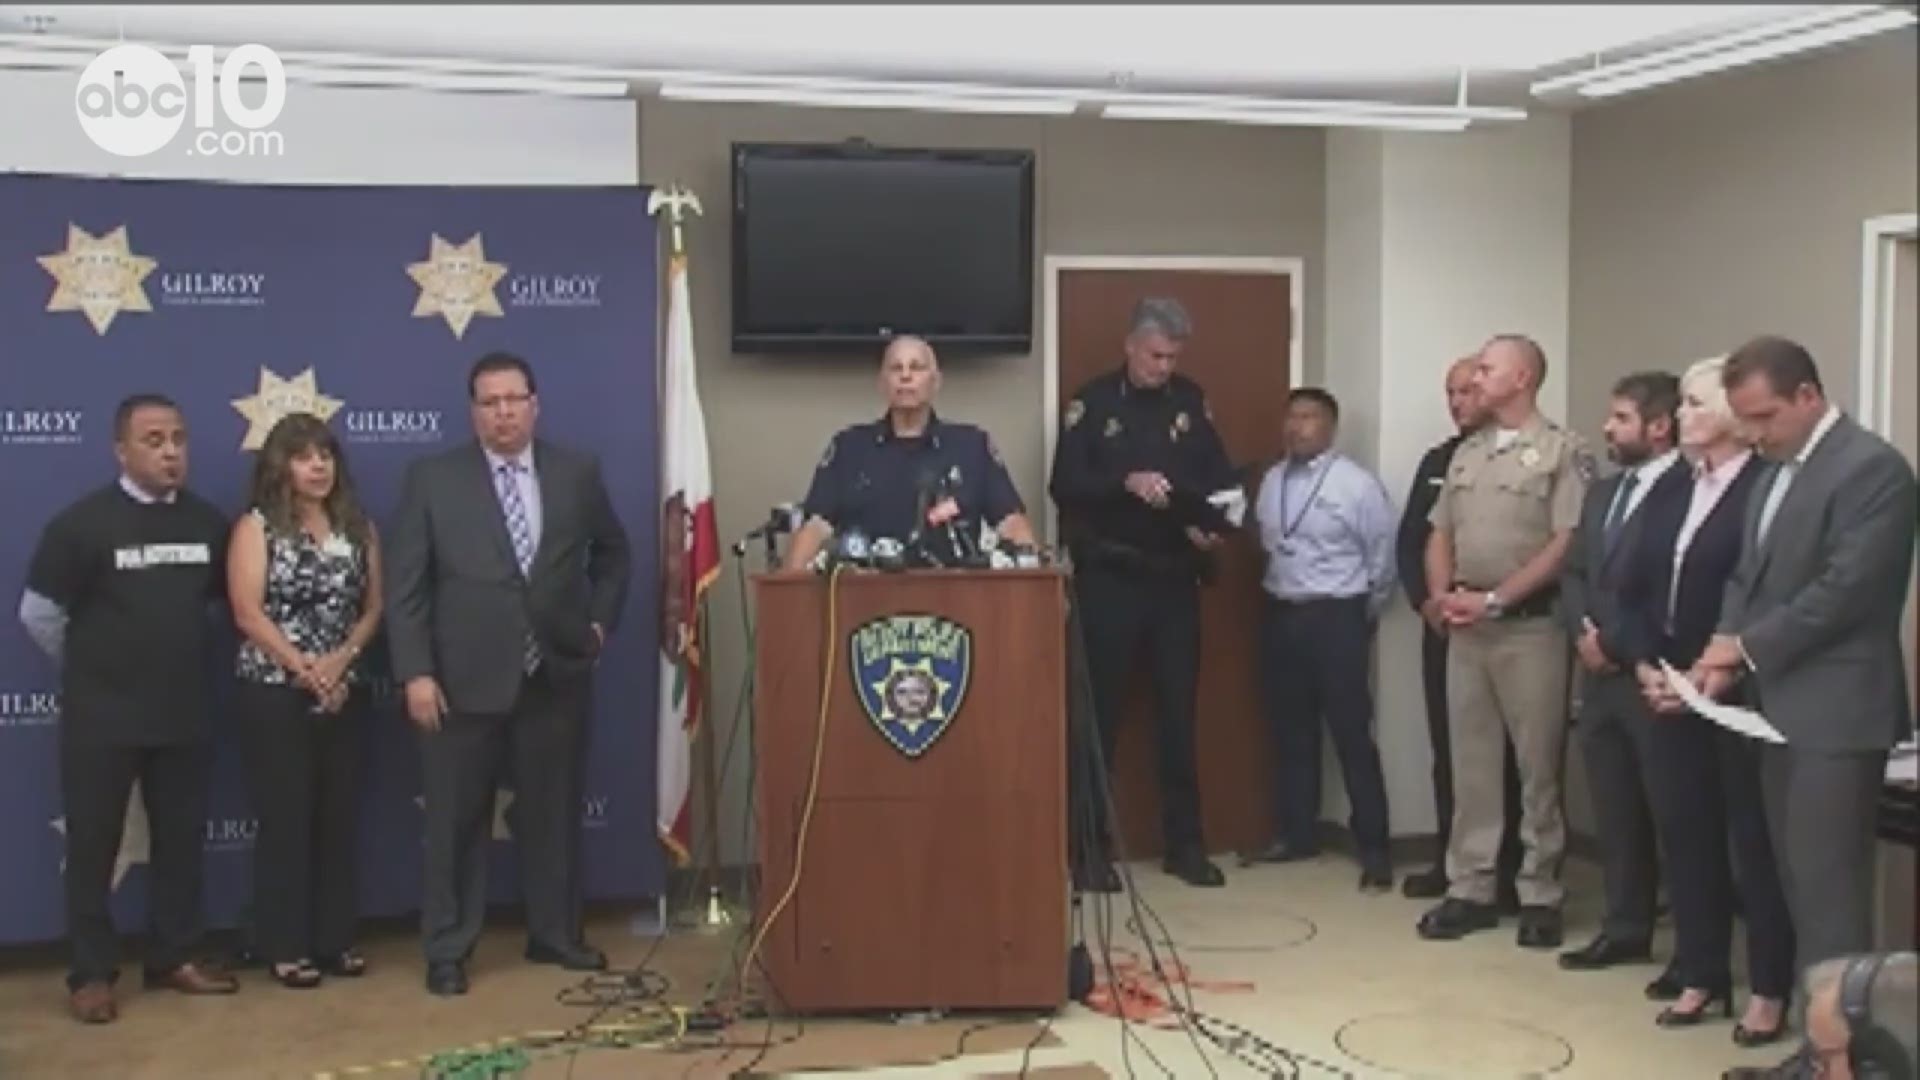 The Gilroy Police Department gives an update on the latest details about the Garlic Festival shooting that left three dead.